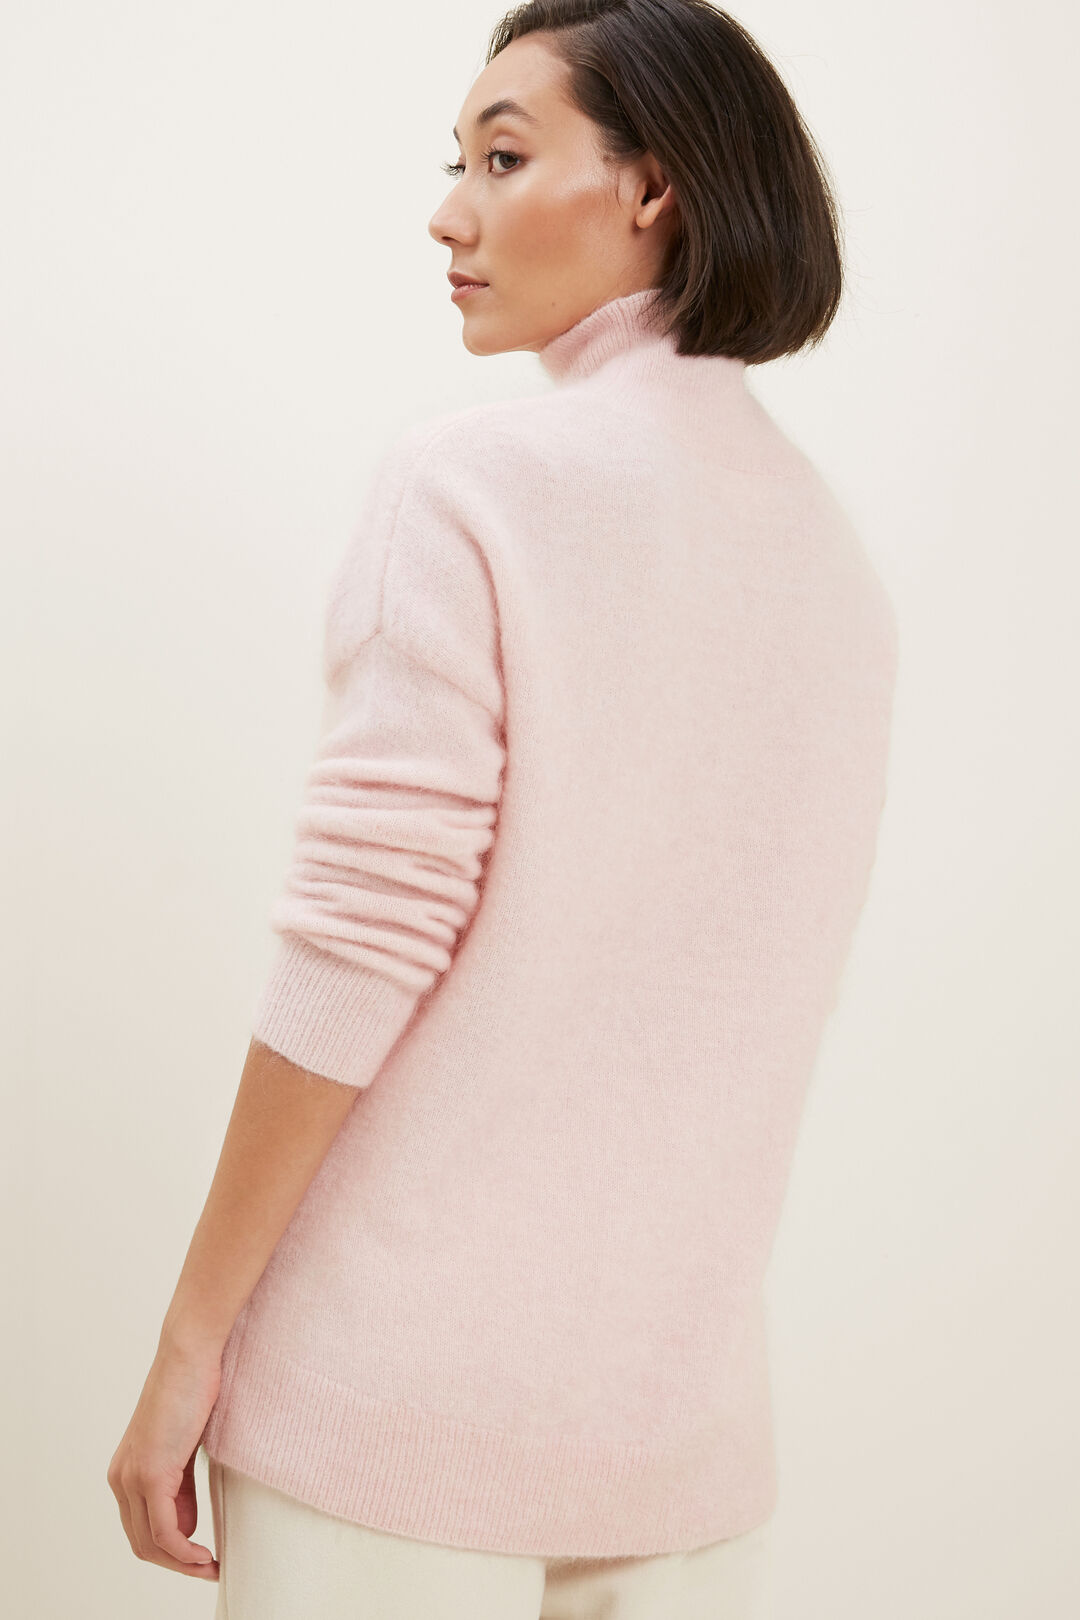 Mohair Roll Neck Sweater  Ash Pink Marle  hi-res